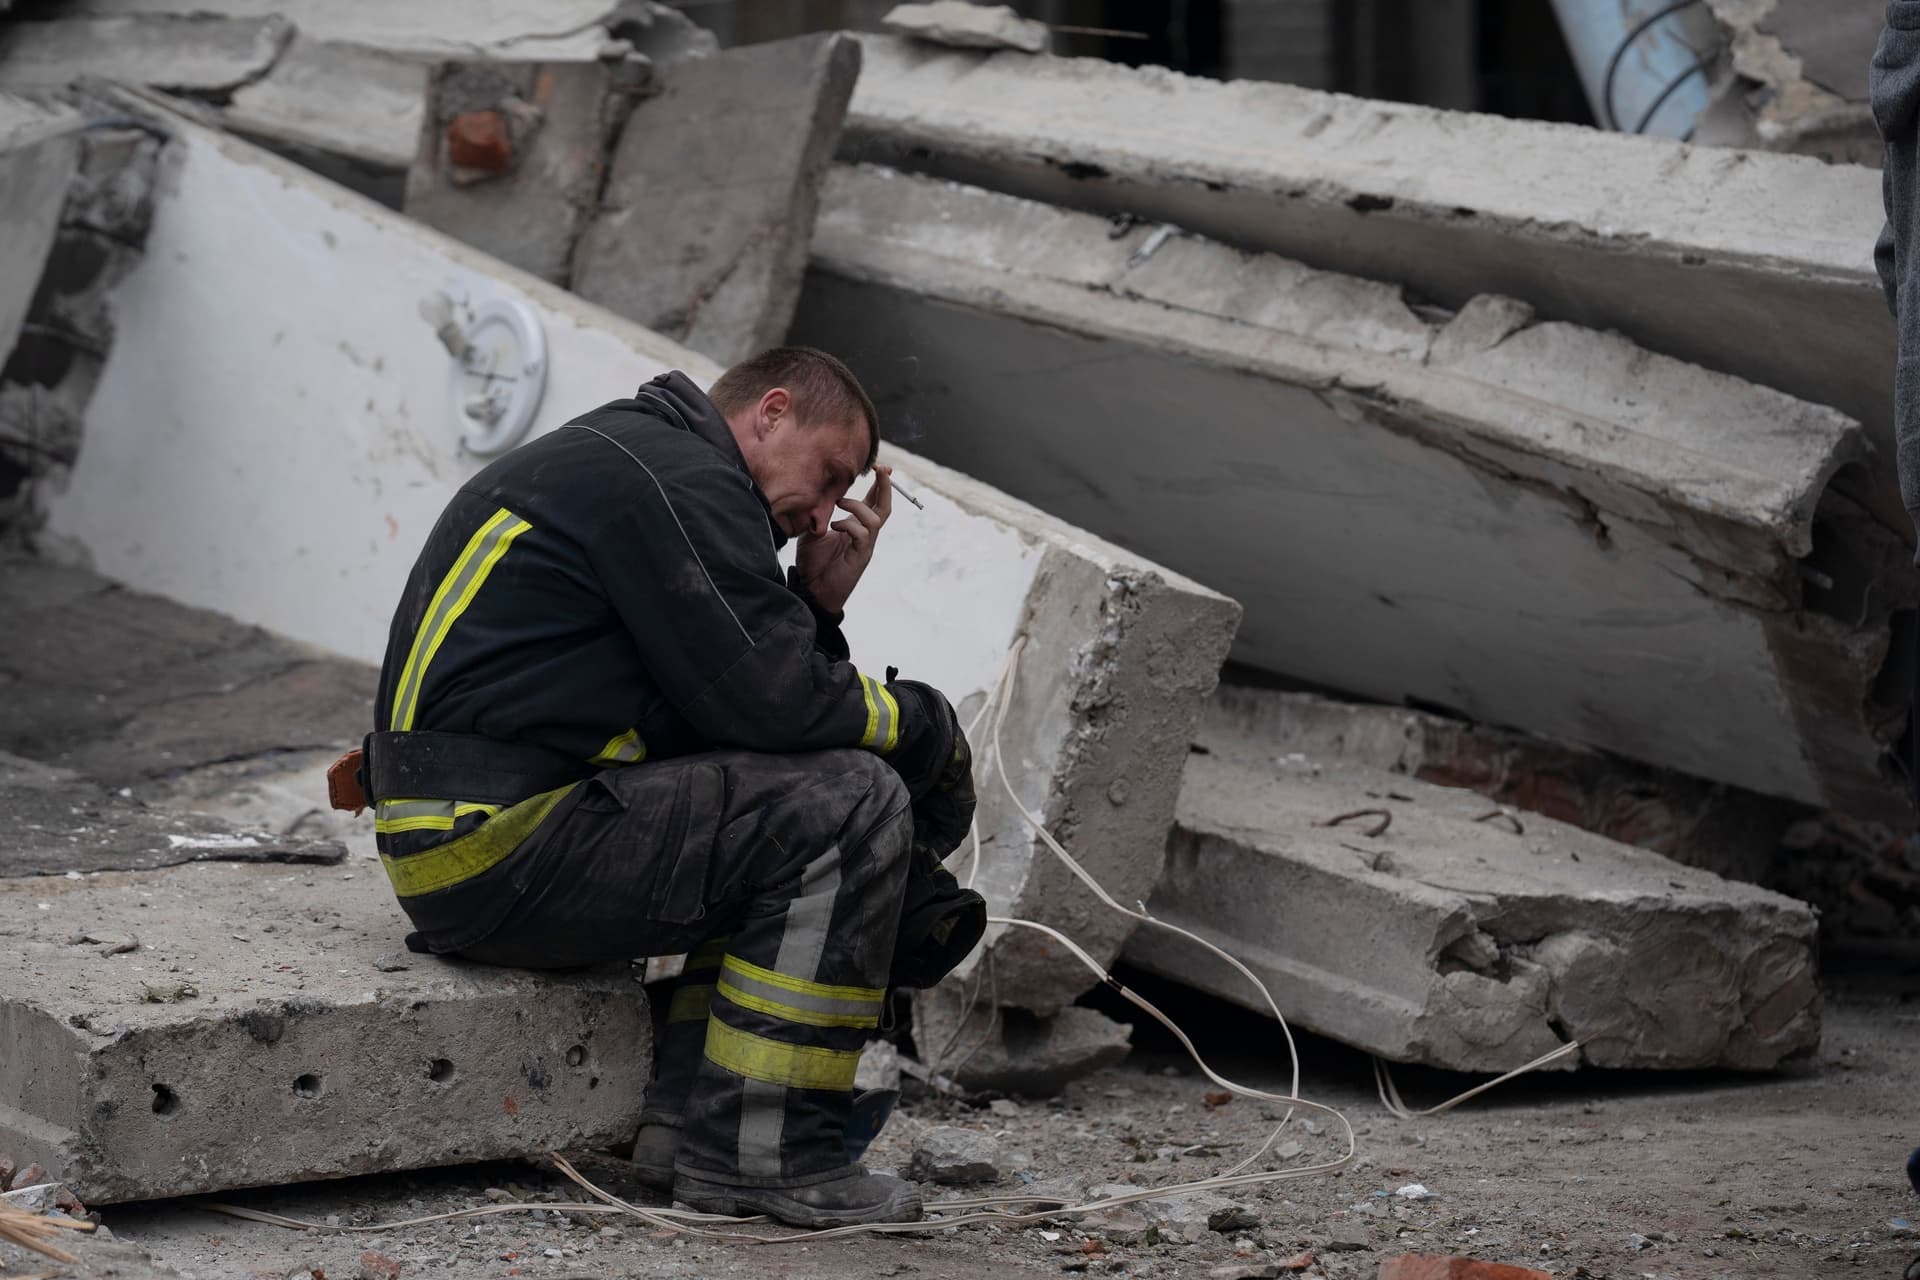 A rescue worker takes a pause as he sits on the debris at the scene where a woman was found dead after a Russian attack that heavily damaged a school in Mykolaivka